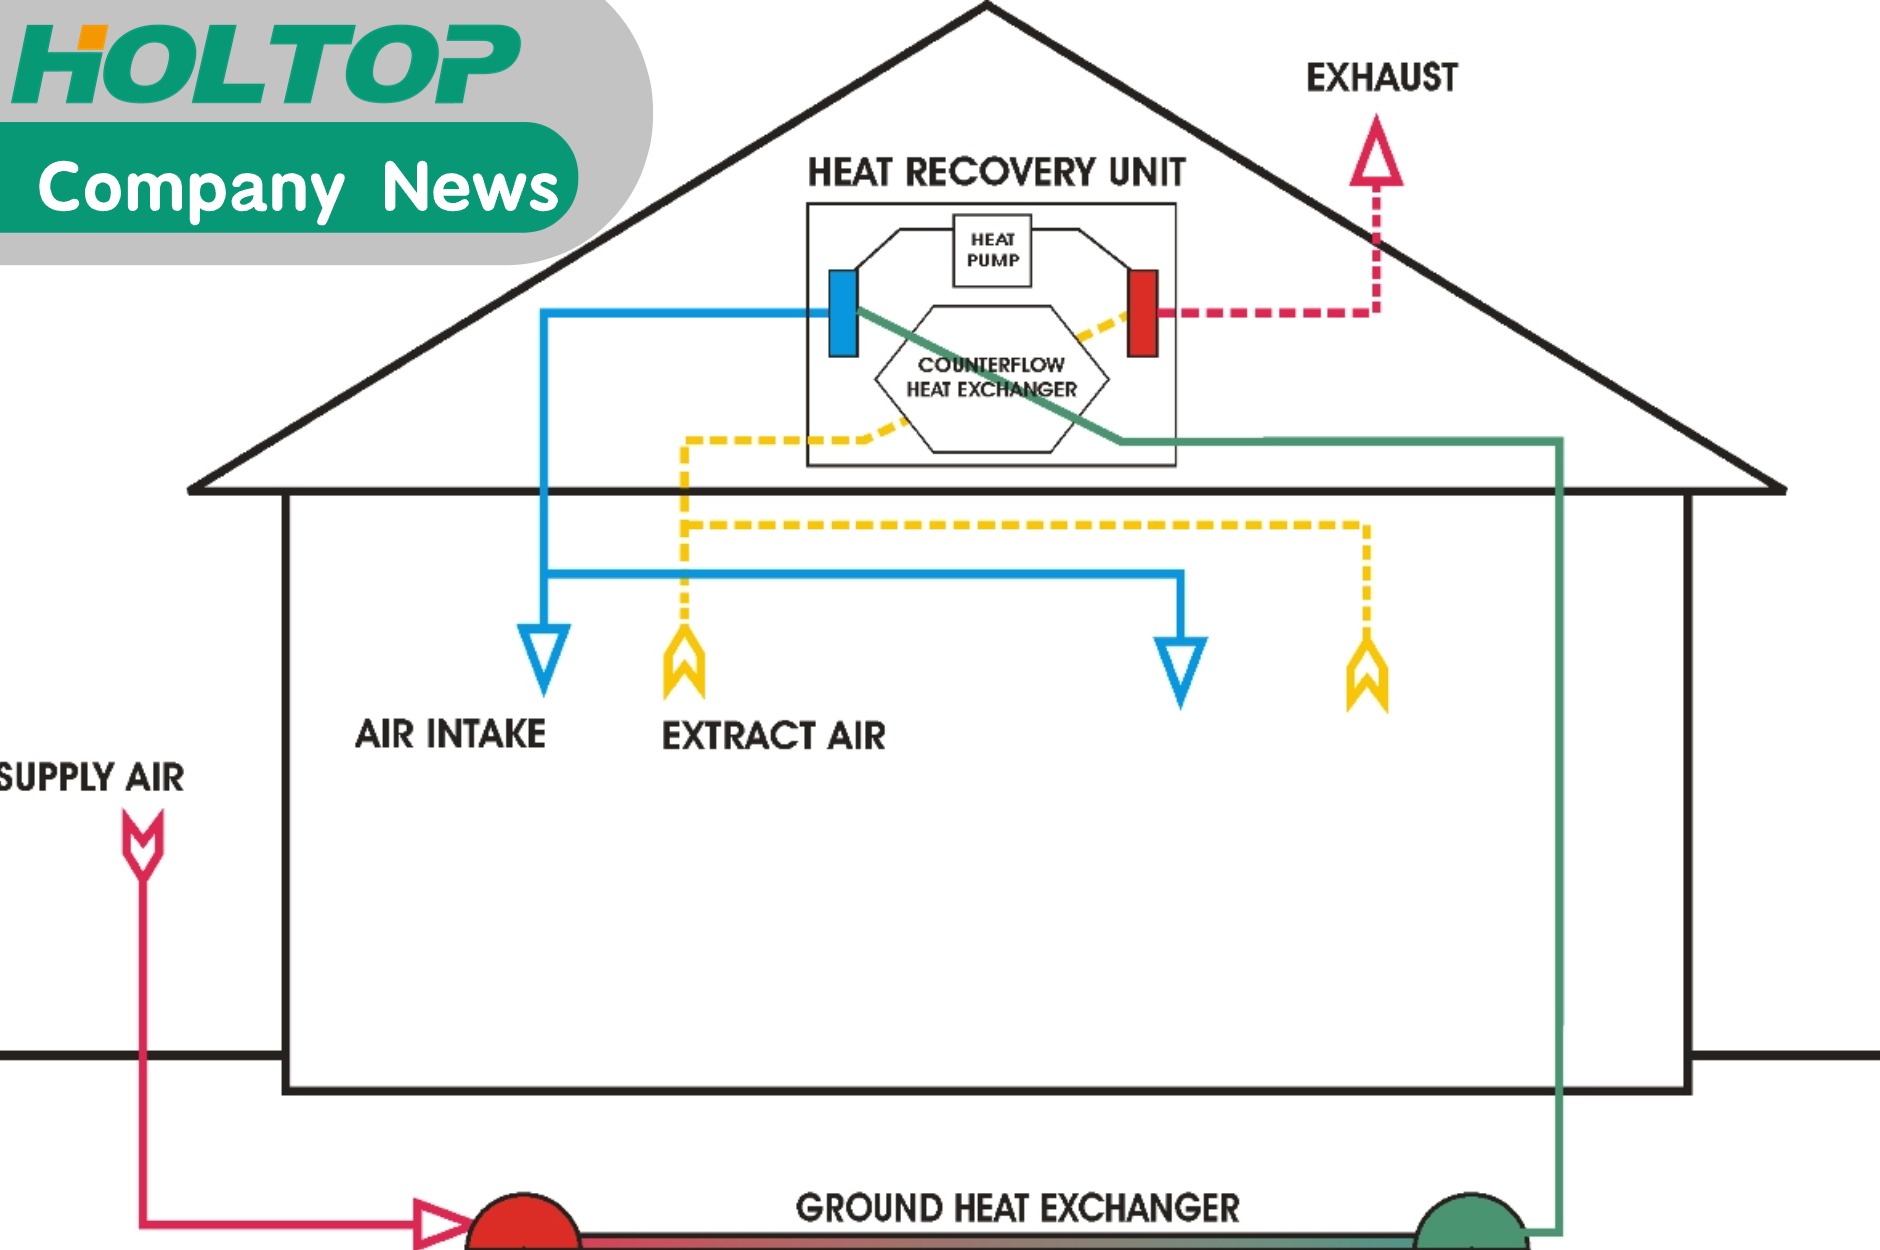 Improve Indoor Air Quality and Energy Efficiency with Holtop Comfort Fresh unit